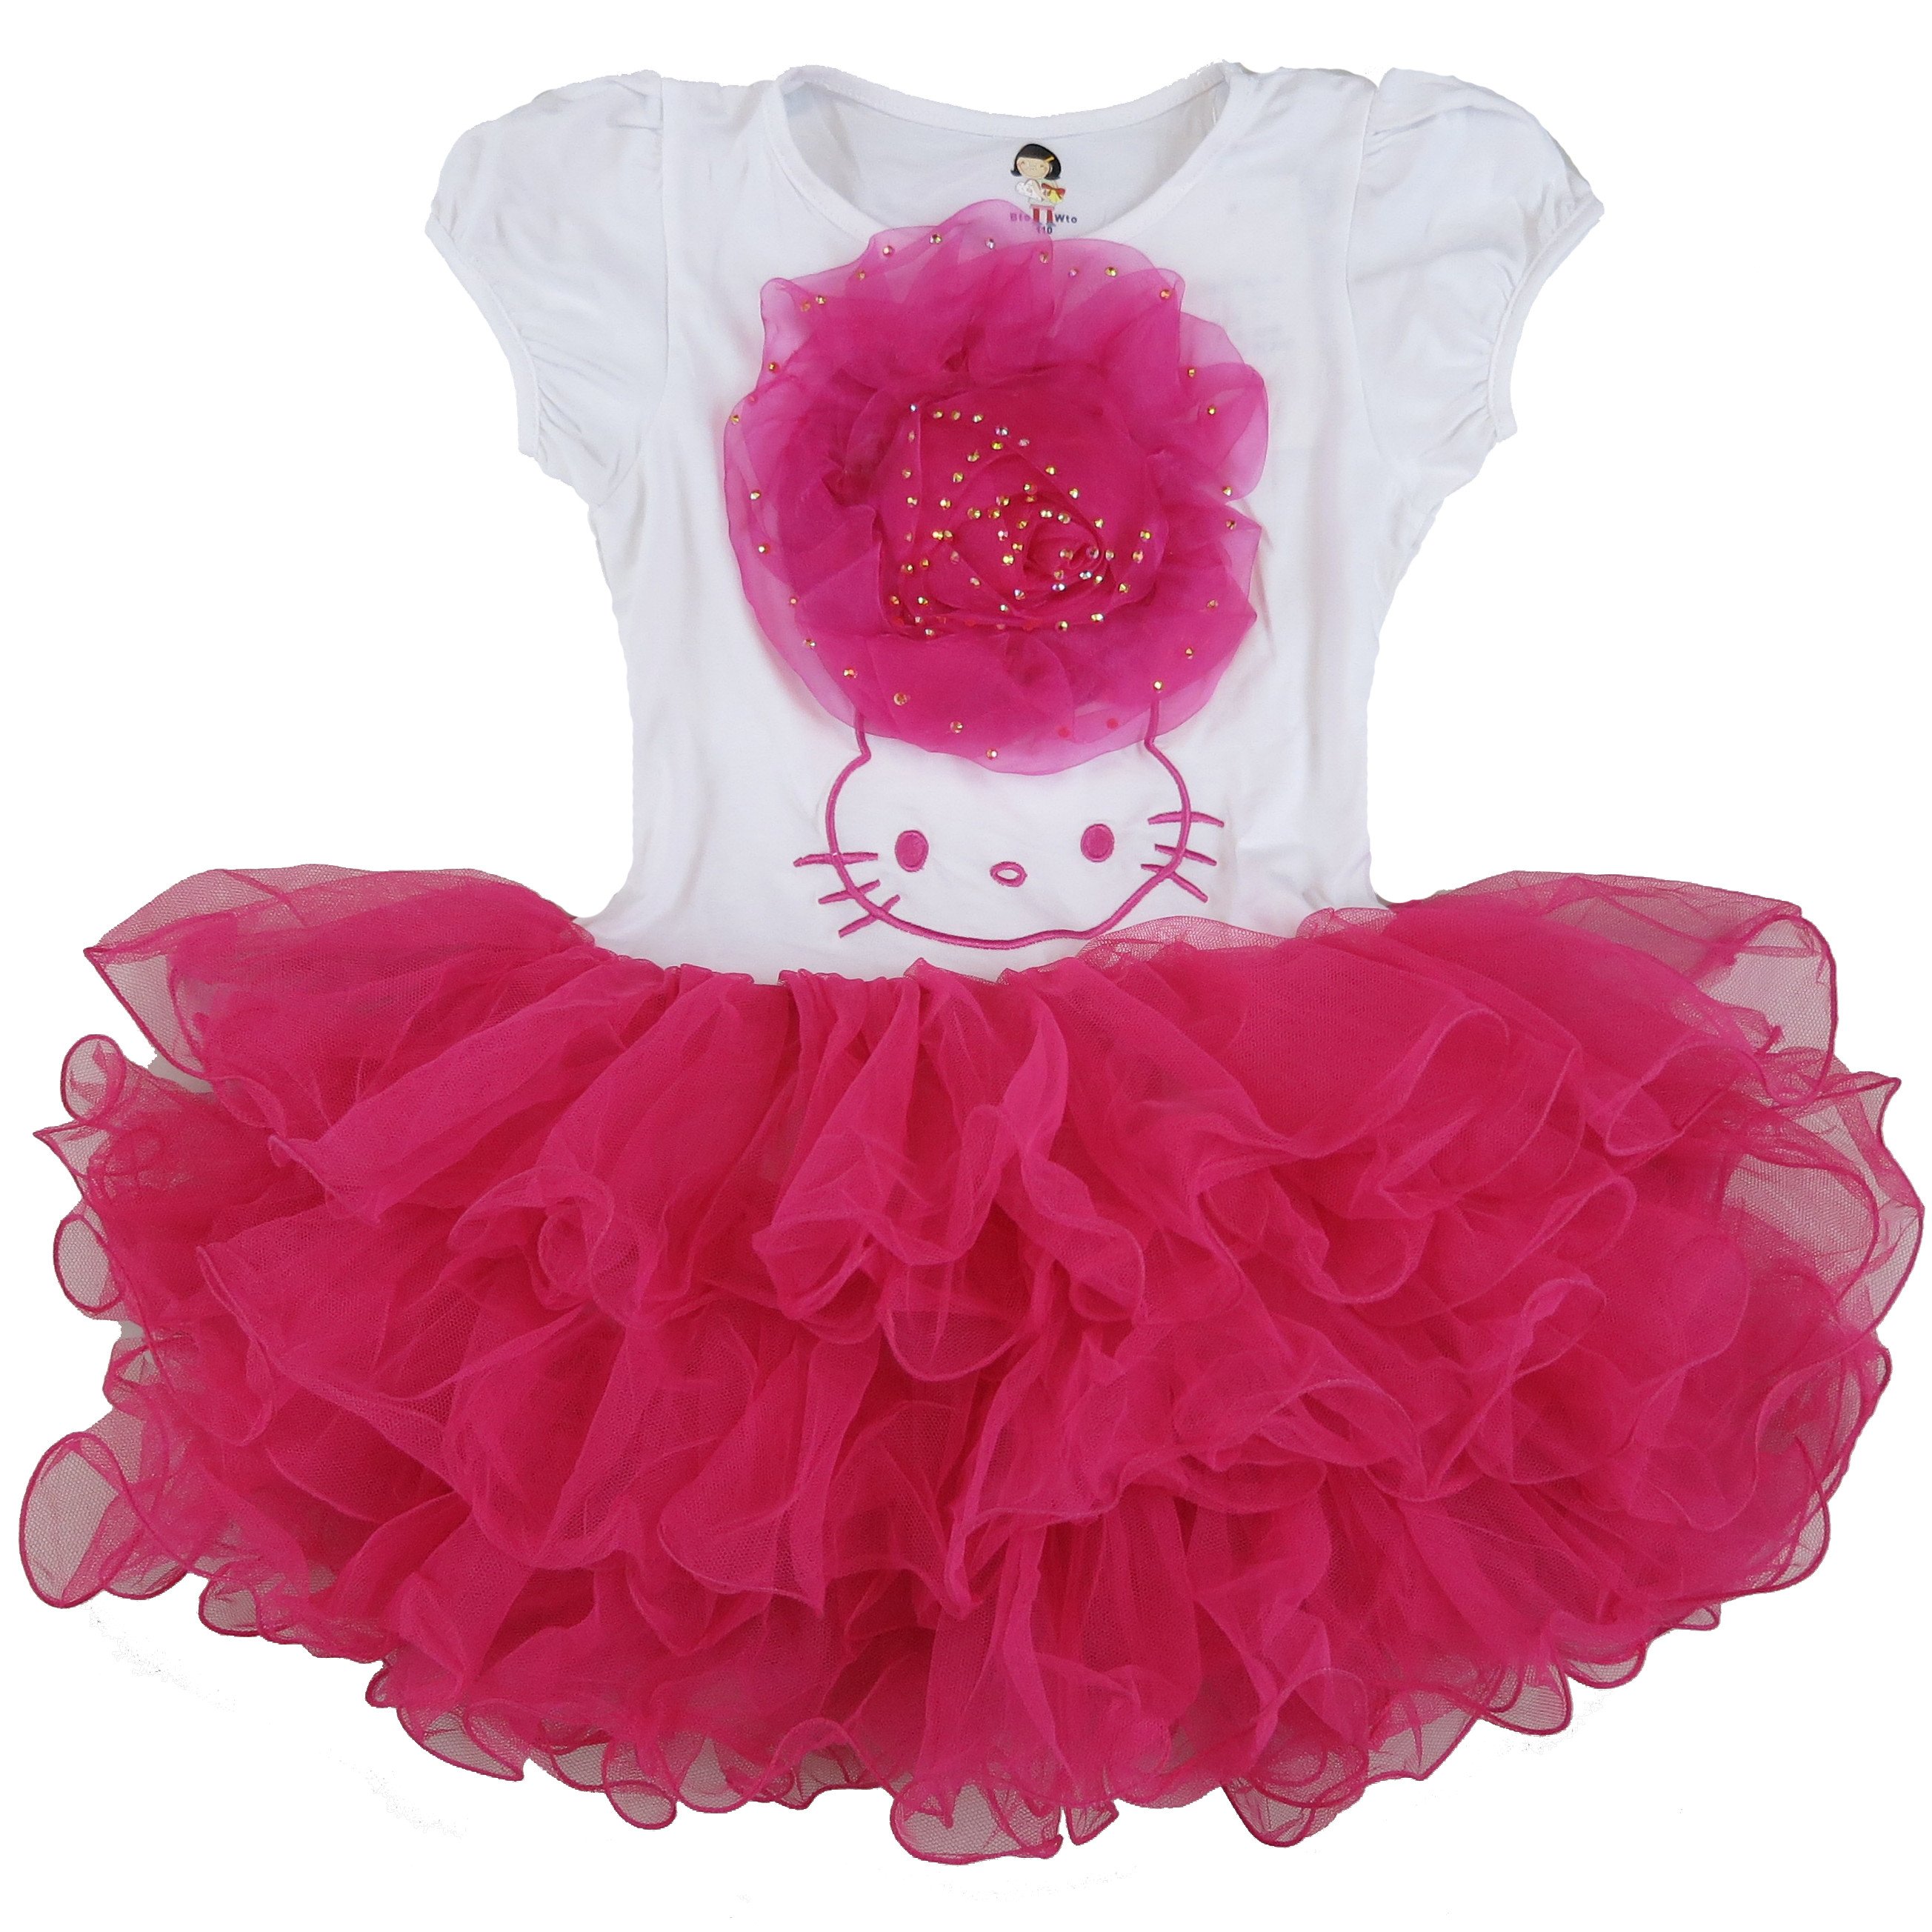 Wenchoice Girl'S White-Hot Pink Kitty Flower Dress M(3T-4T) - image 1 of 1